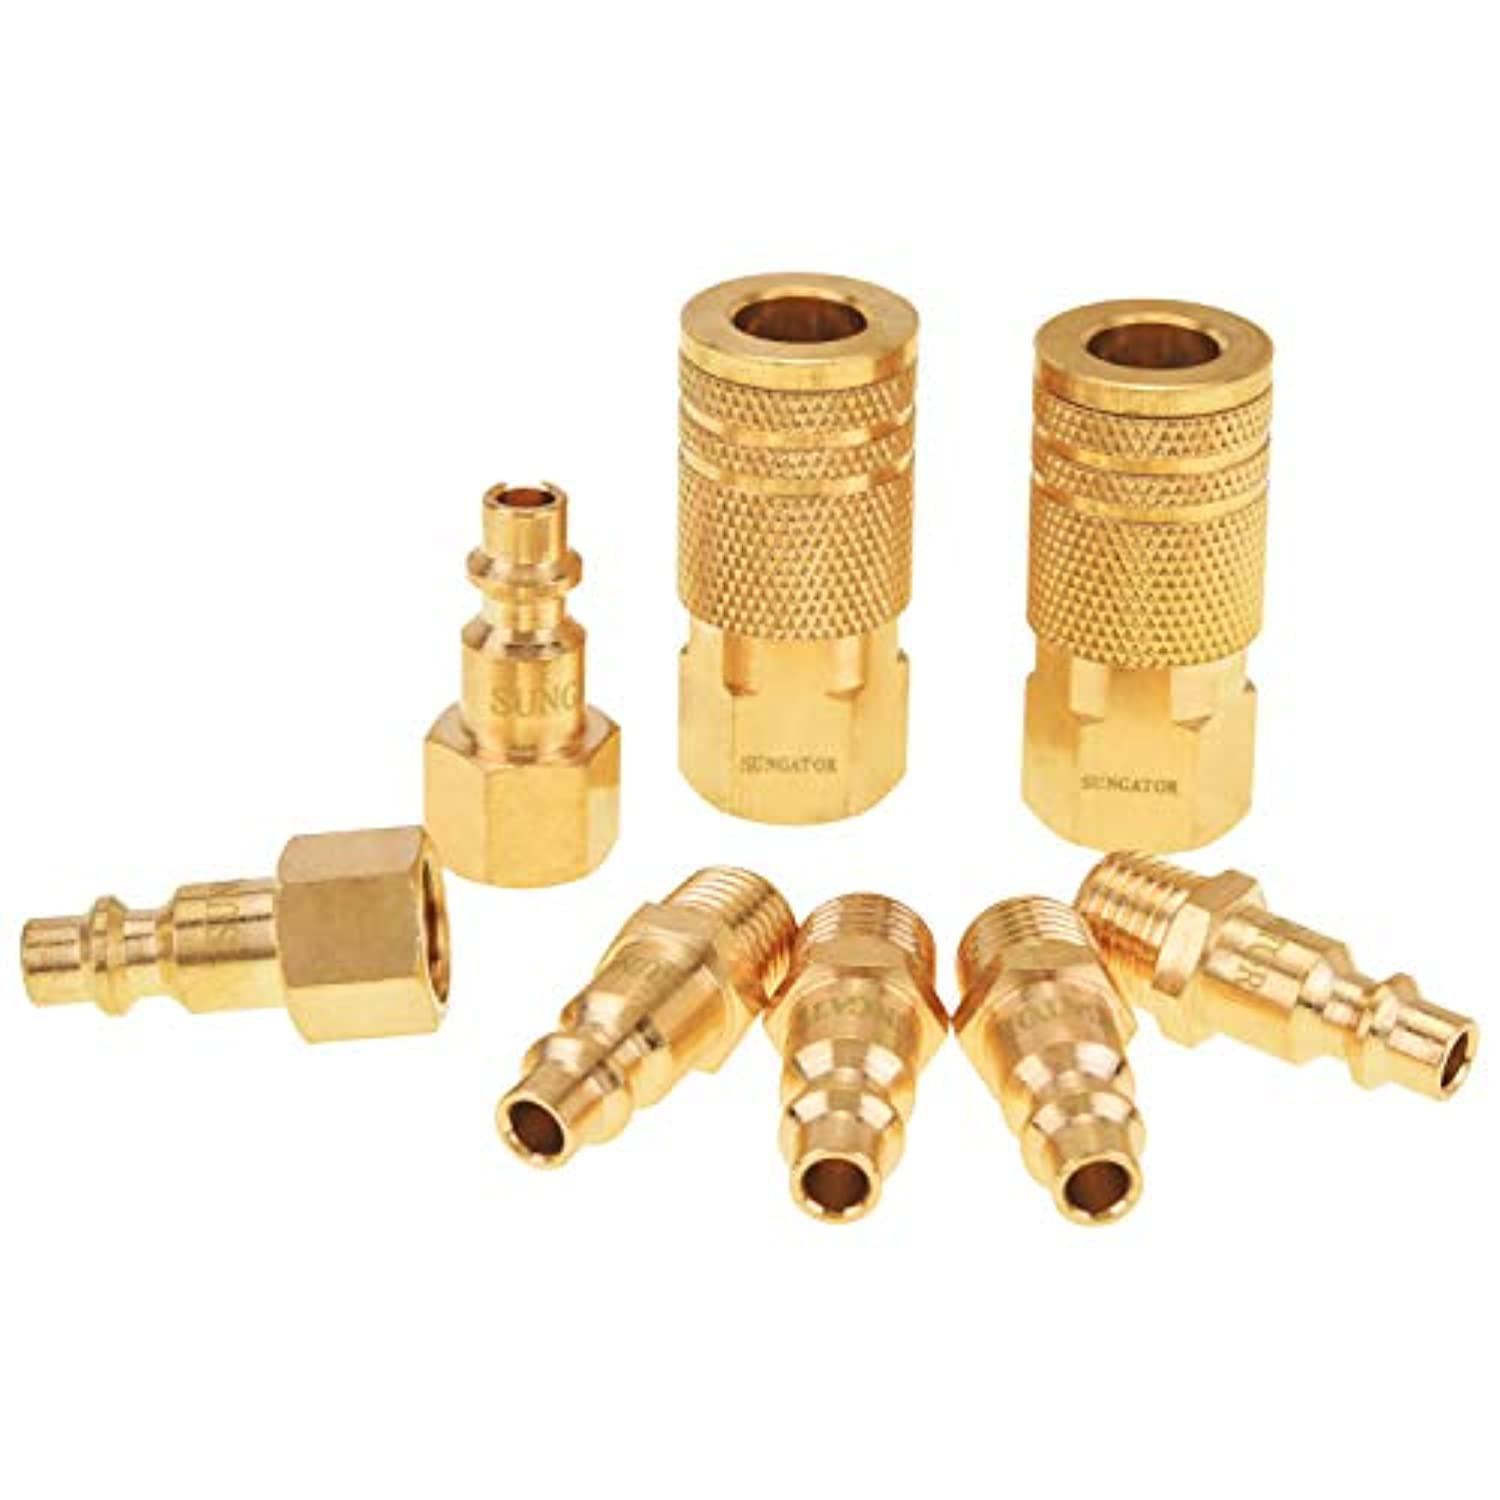 sungator air coupler and plug kit, quick connector air fittings, 1/4 inch npt industrial brass air hose fitting (8-piece)